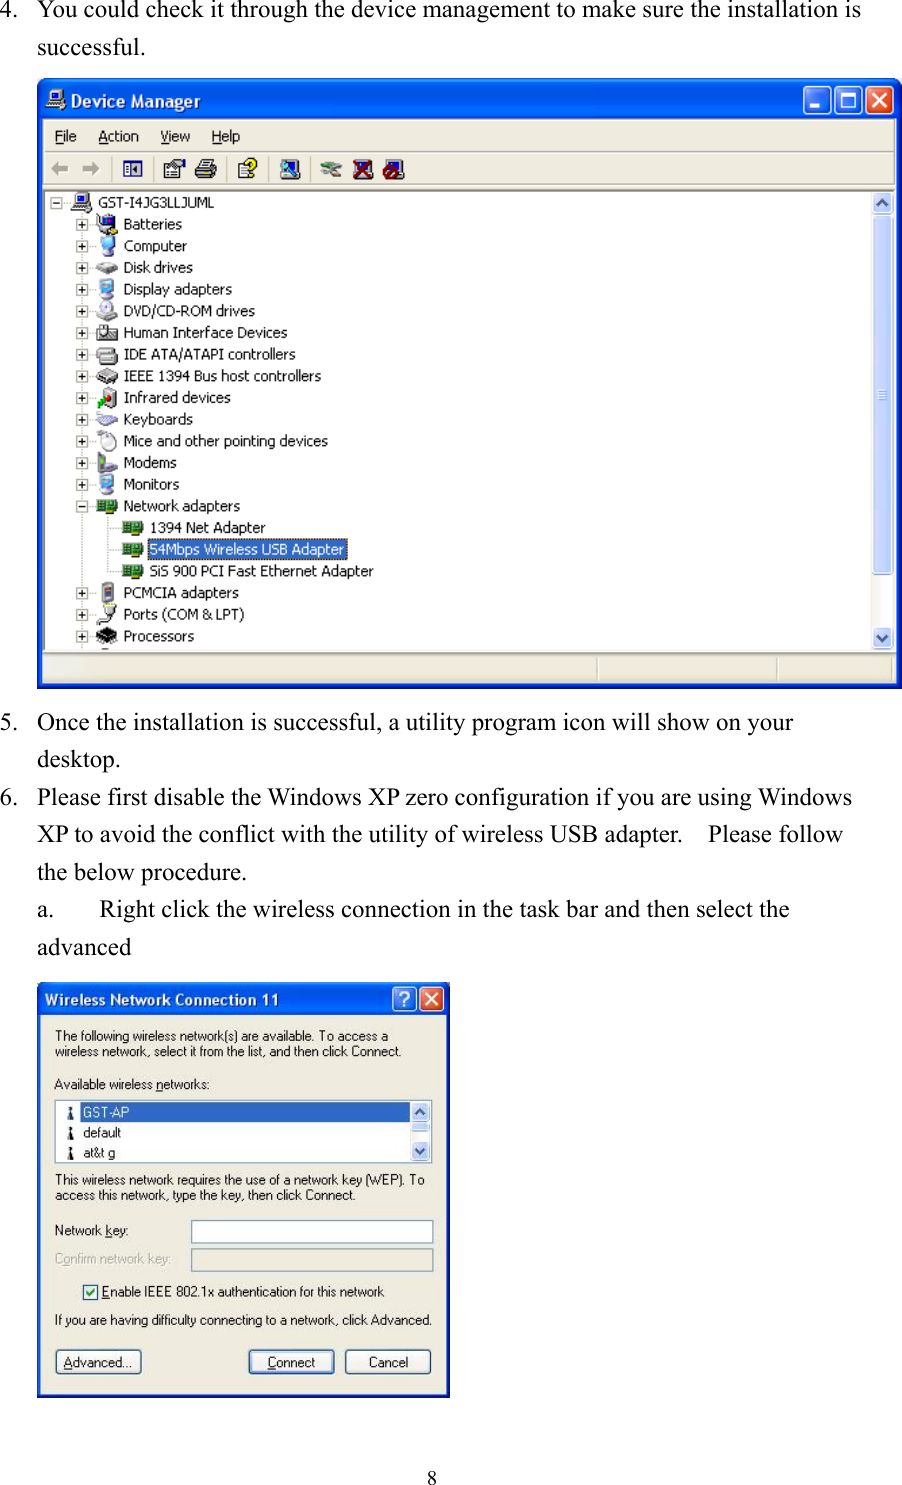 4.  You could check it through the device management to make sure the installation is successful.  5.  Once the installation is successful, a utility program icon will show on your desktop.   6.  Please first disable the Windows XP zero configuration if you are using Windows XP to avoid the conflict with the utility of wireless USB adapter.    Please follow the below procedure. a.  Right click the wireless connection in the task bar and then select the advanced   8